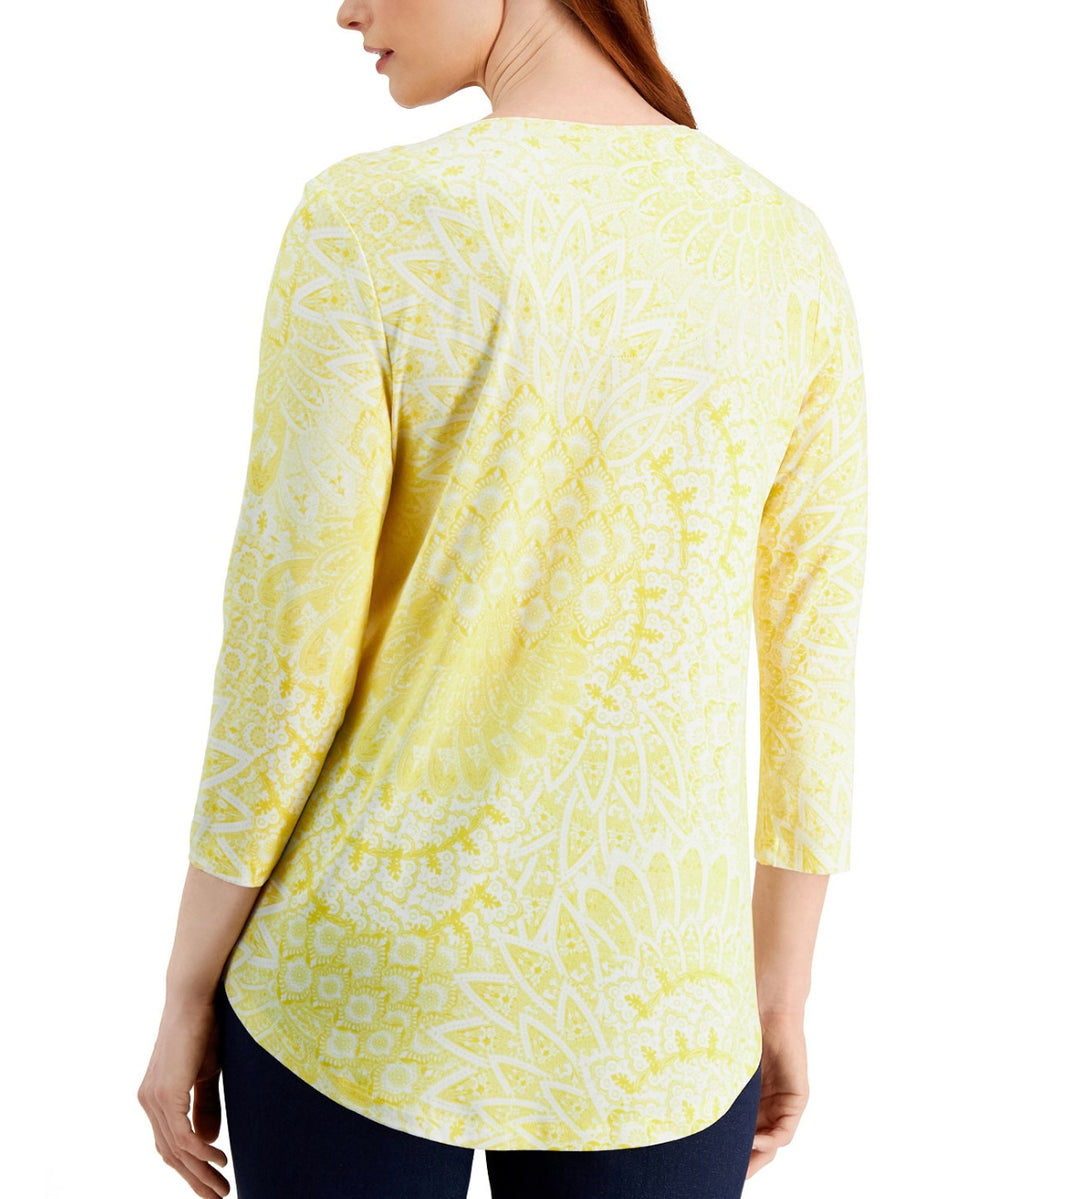 JM Collection Women's 3/4-Sleeve Printed Top White/Yellow Petite Size PL